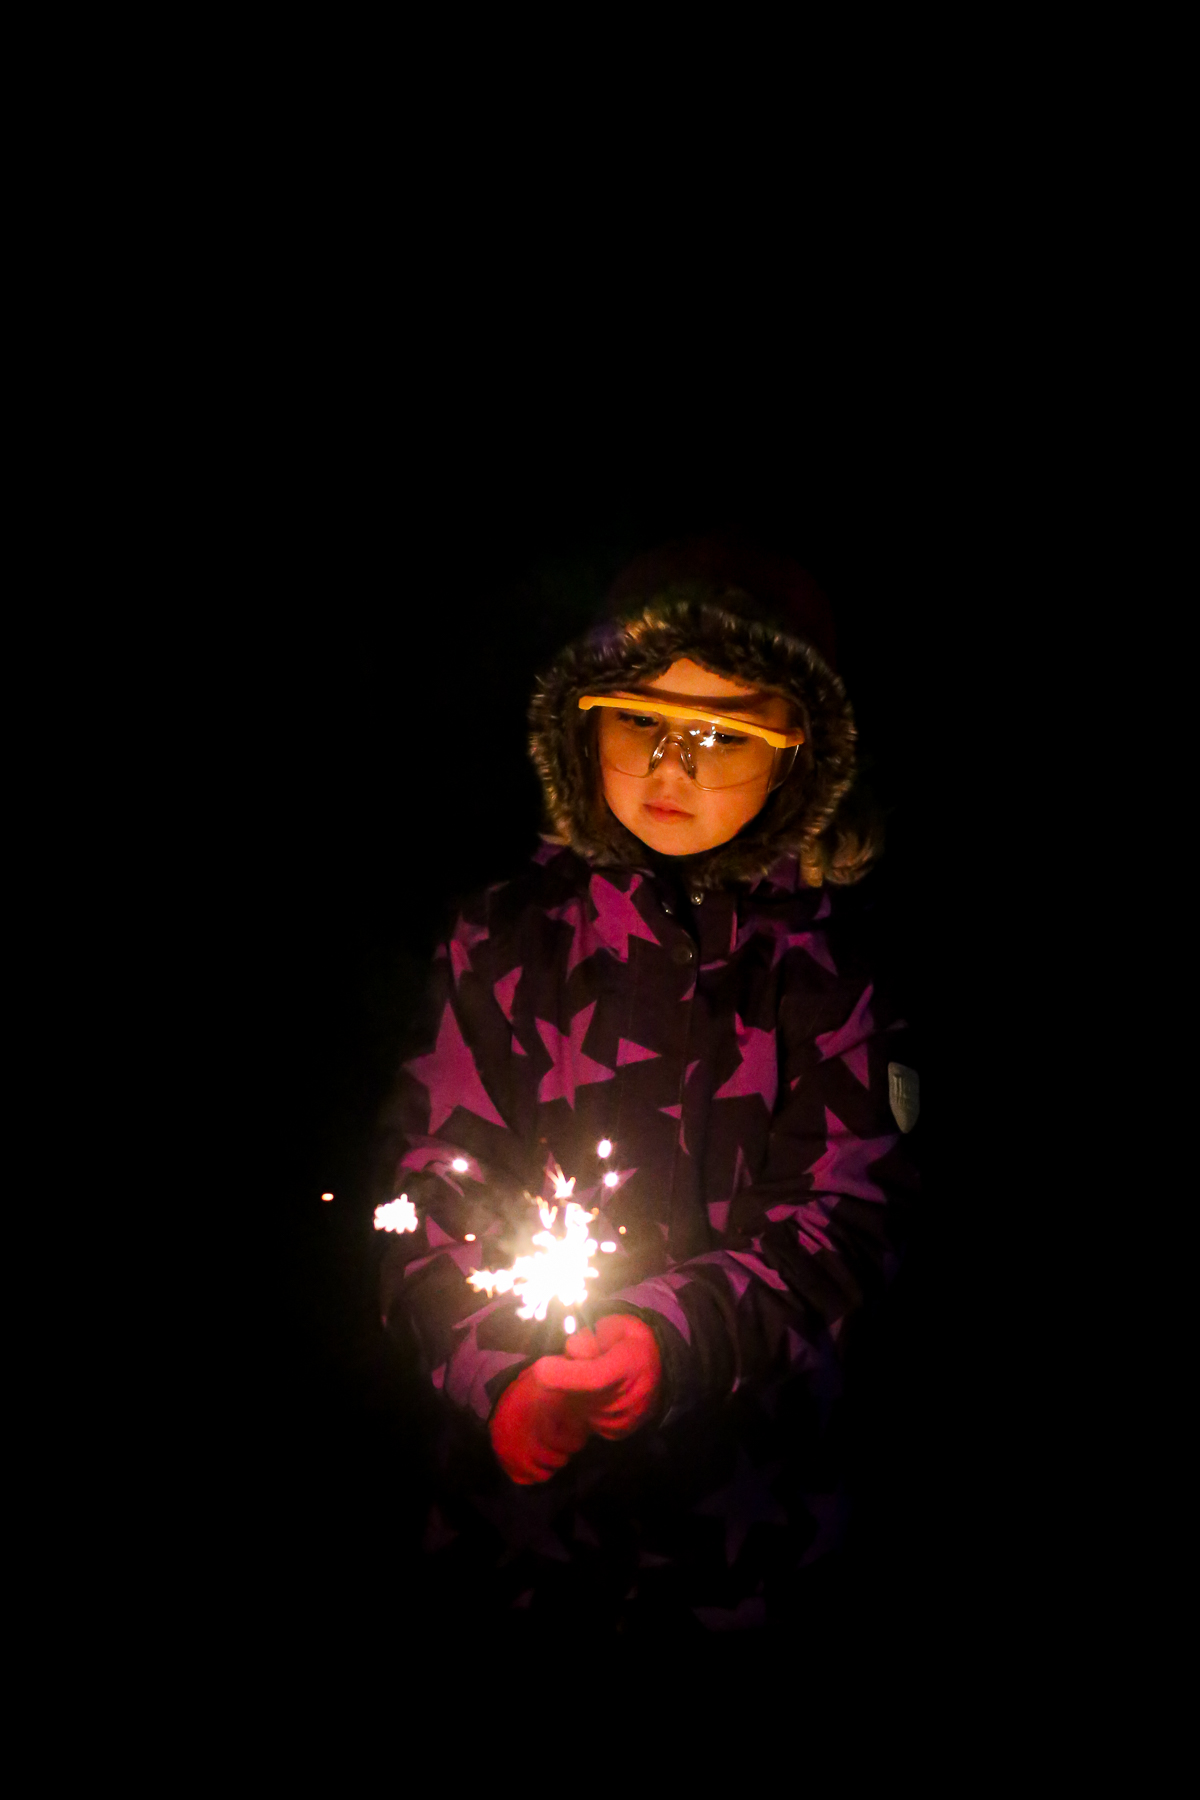 In Denmark, everyone launches their own fireworks on New Year's Eve - literally.  Even the youngest take part - don't forget those safety goggles!